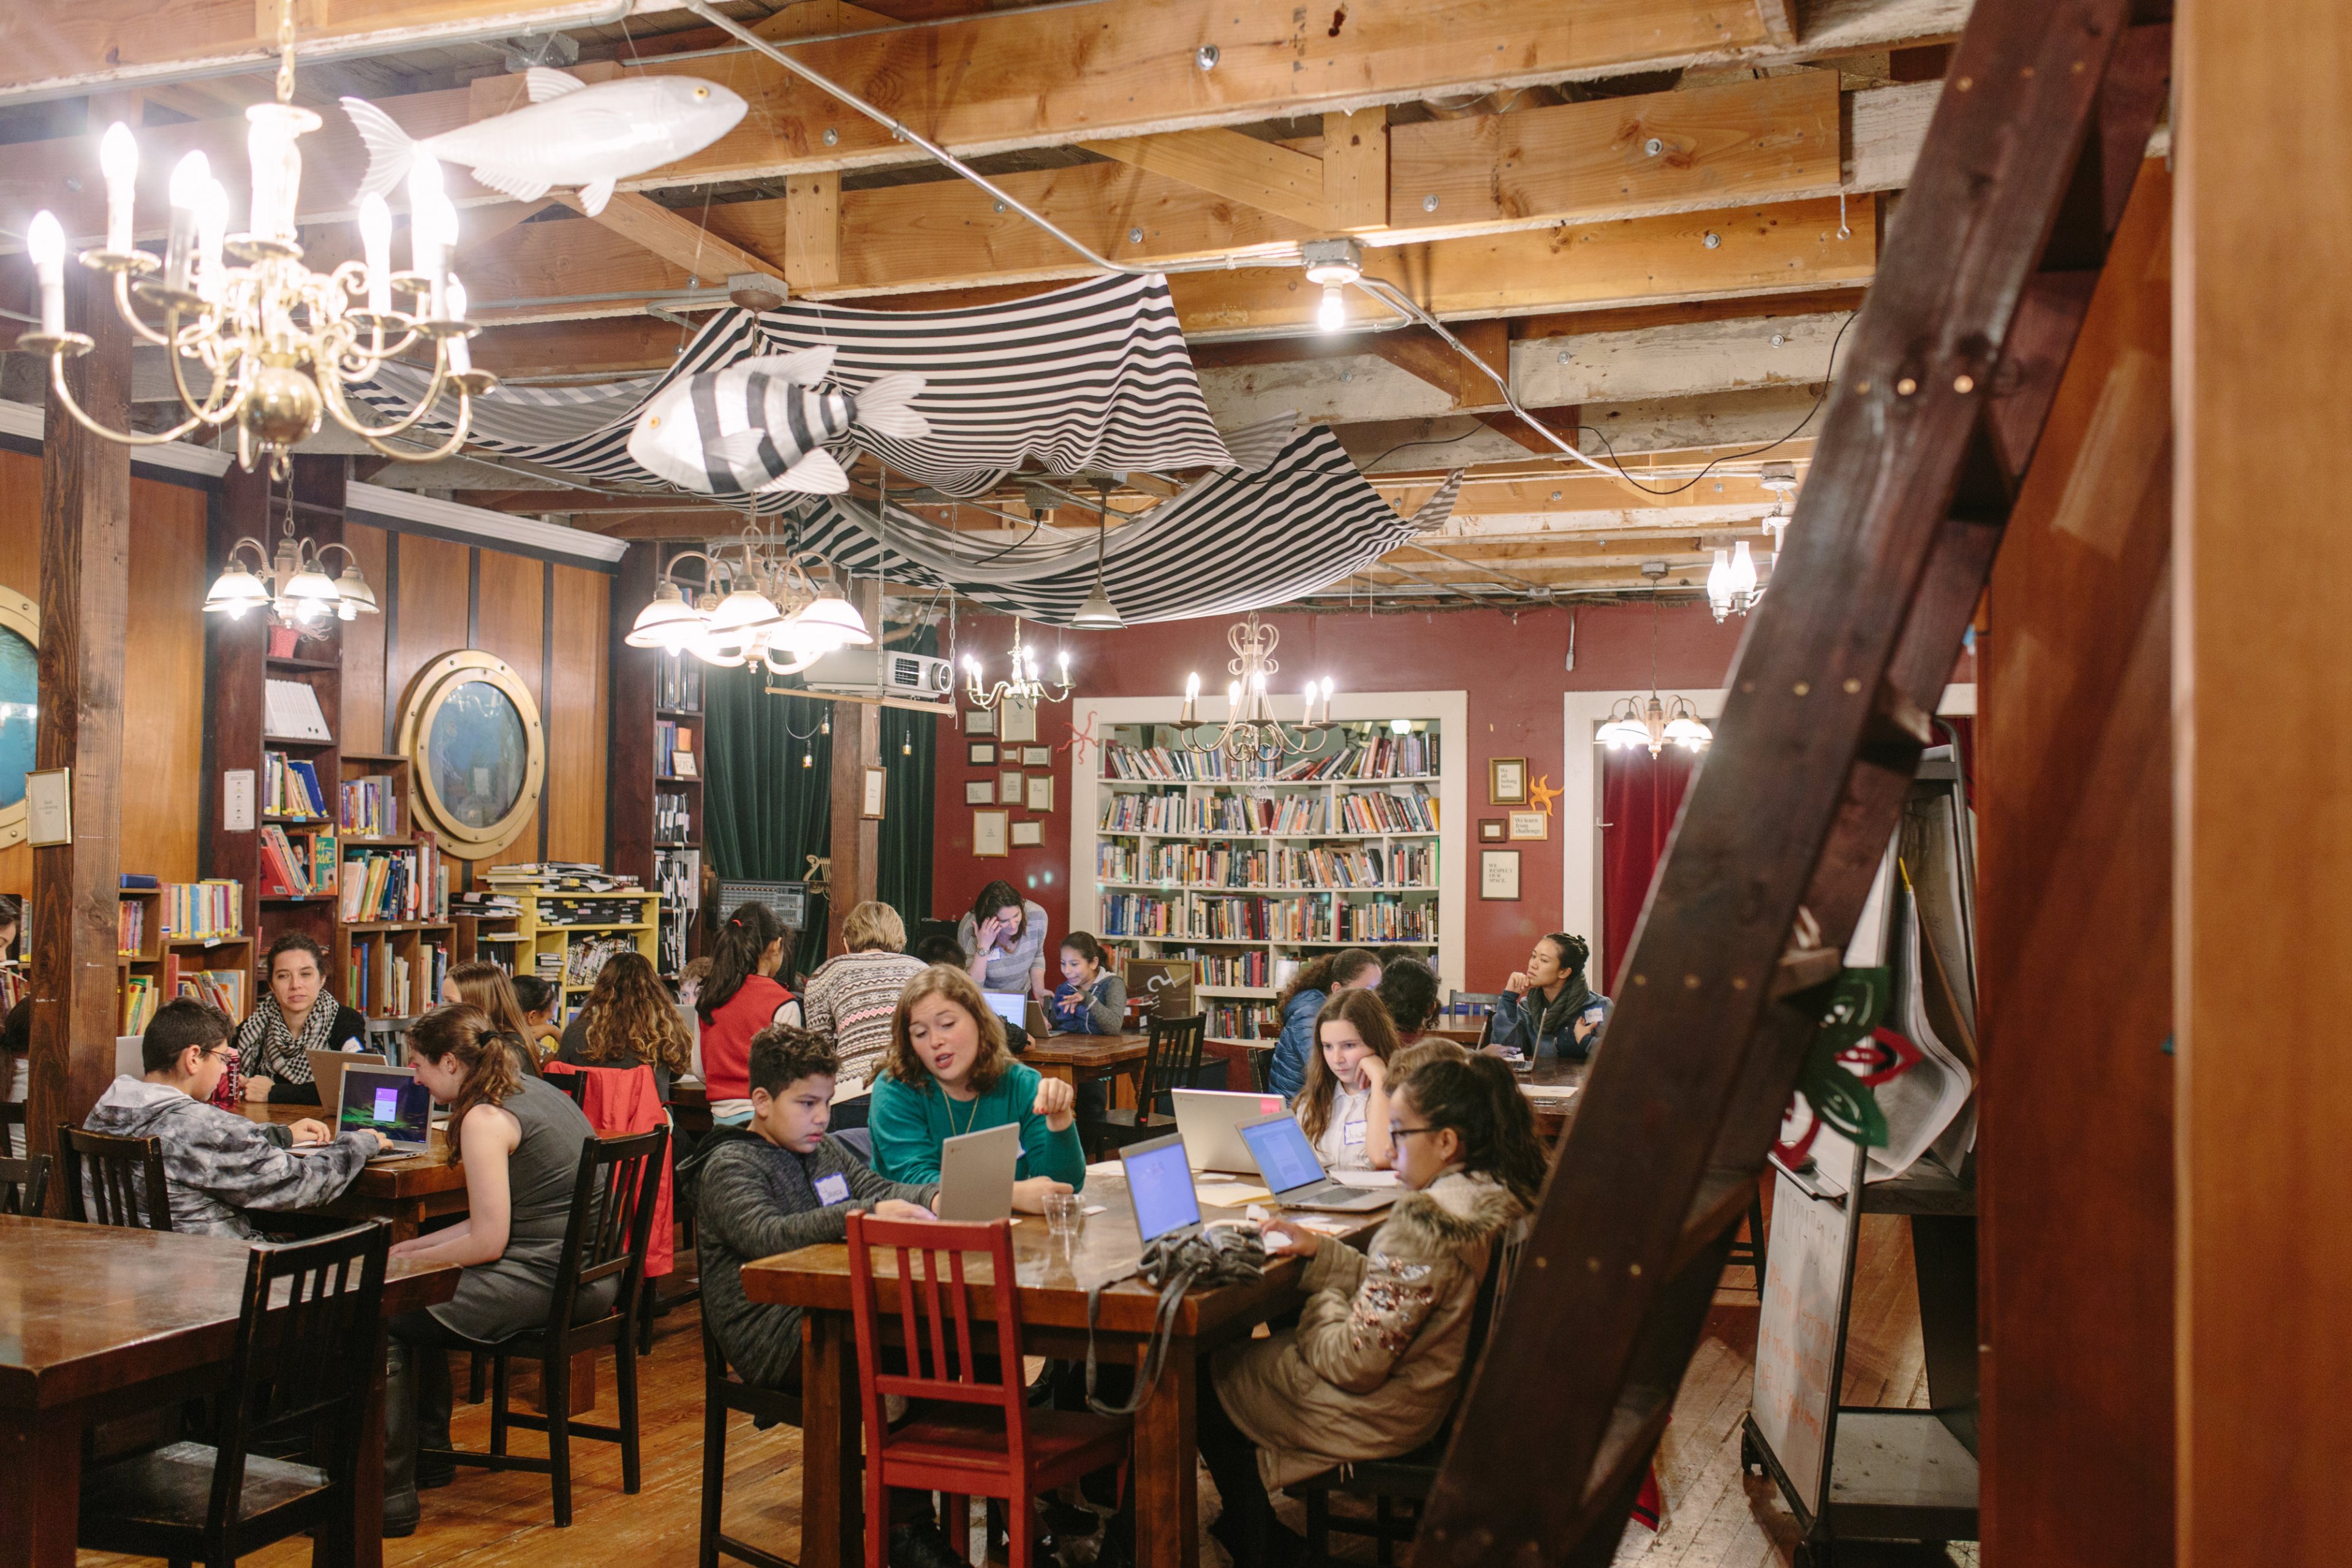 Young people sit at a long table with papers in front of them with chandeliers and artifacts hanging from the ceiling.